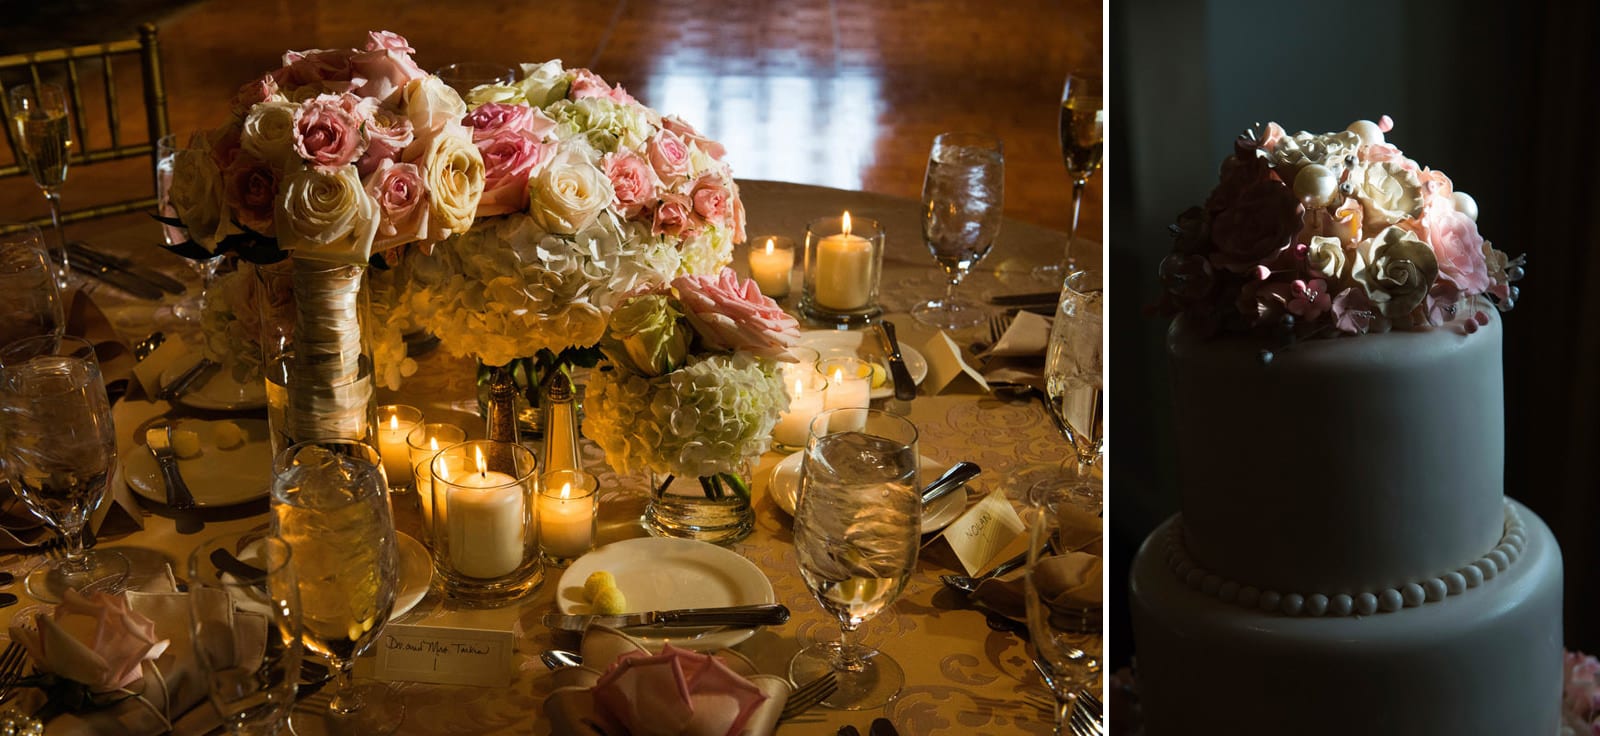 A shaft of sunlight illuminates a wedding cake. Flowers, candles and gold table cloths decorate a dinner table during an Omni Bedford Springs Weddings.